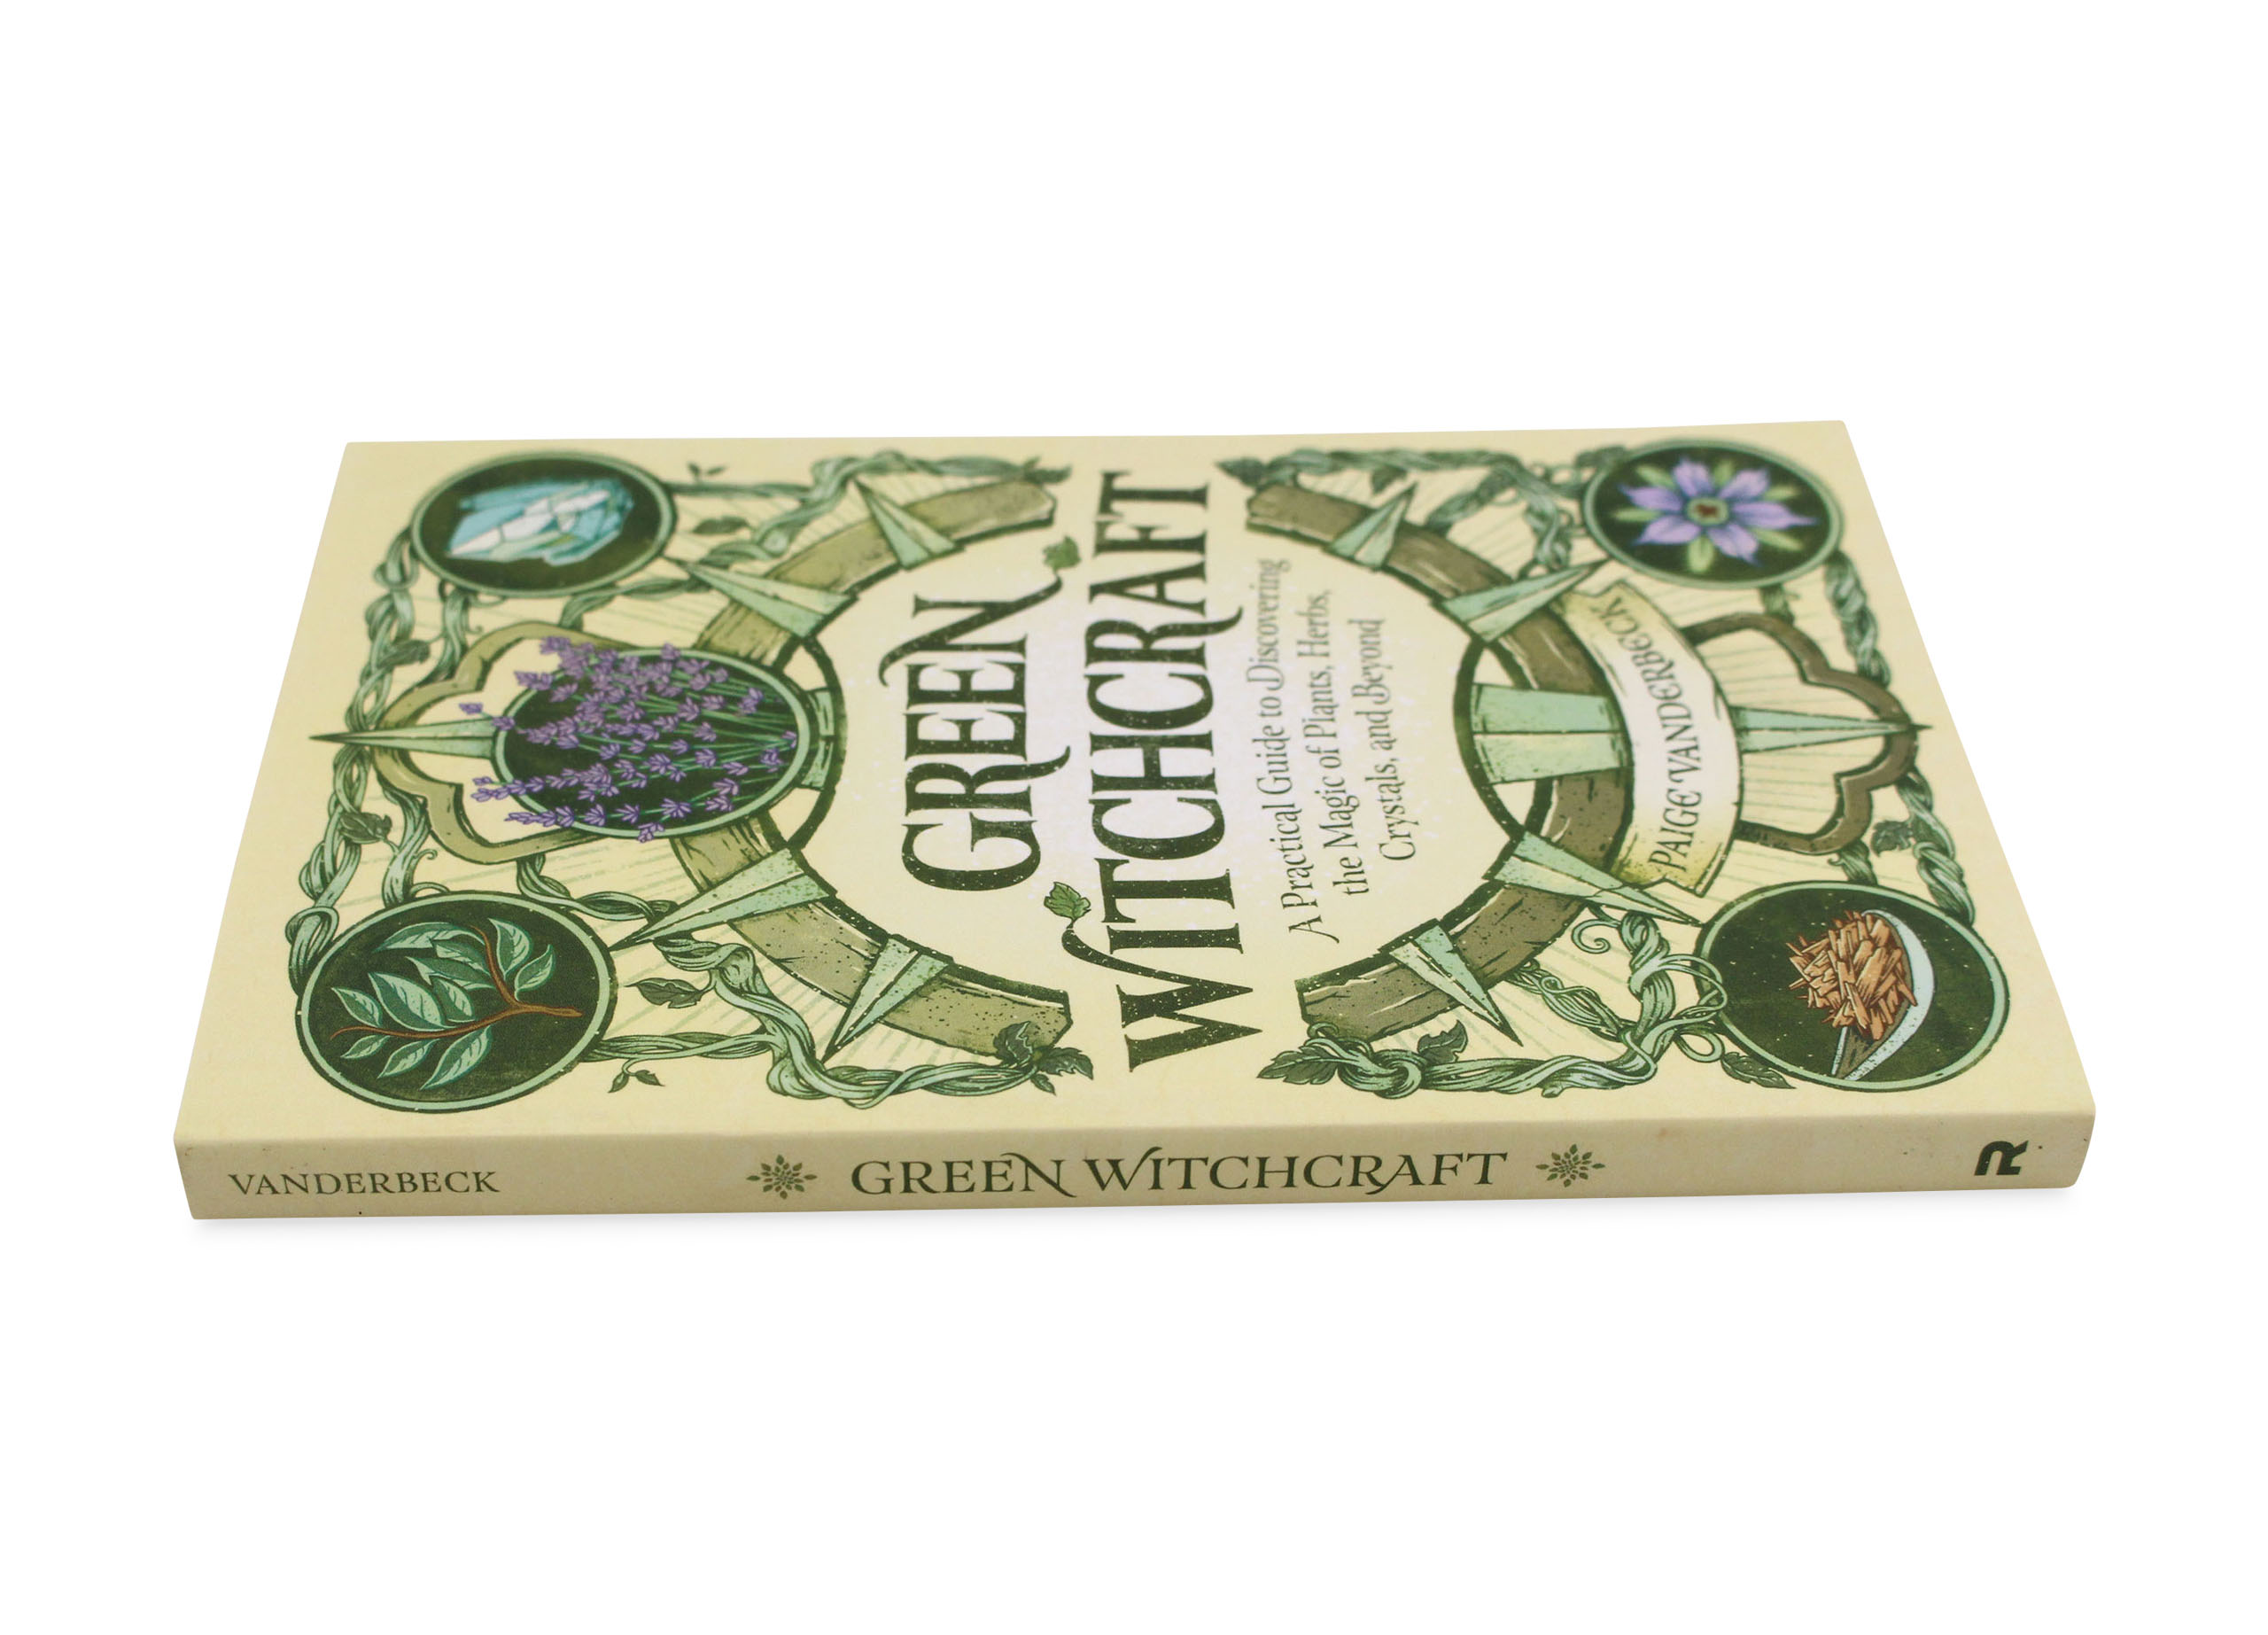 Green Witchcraft: A Practical Guide to Discovering the Magic of